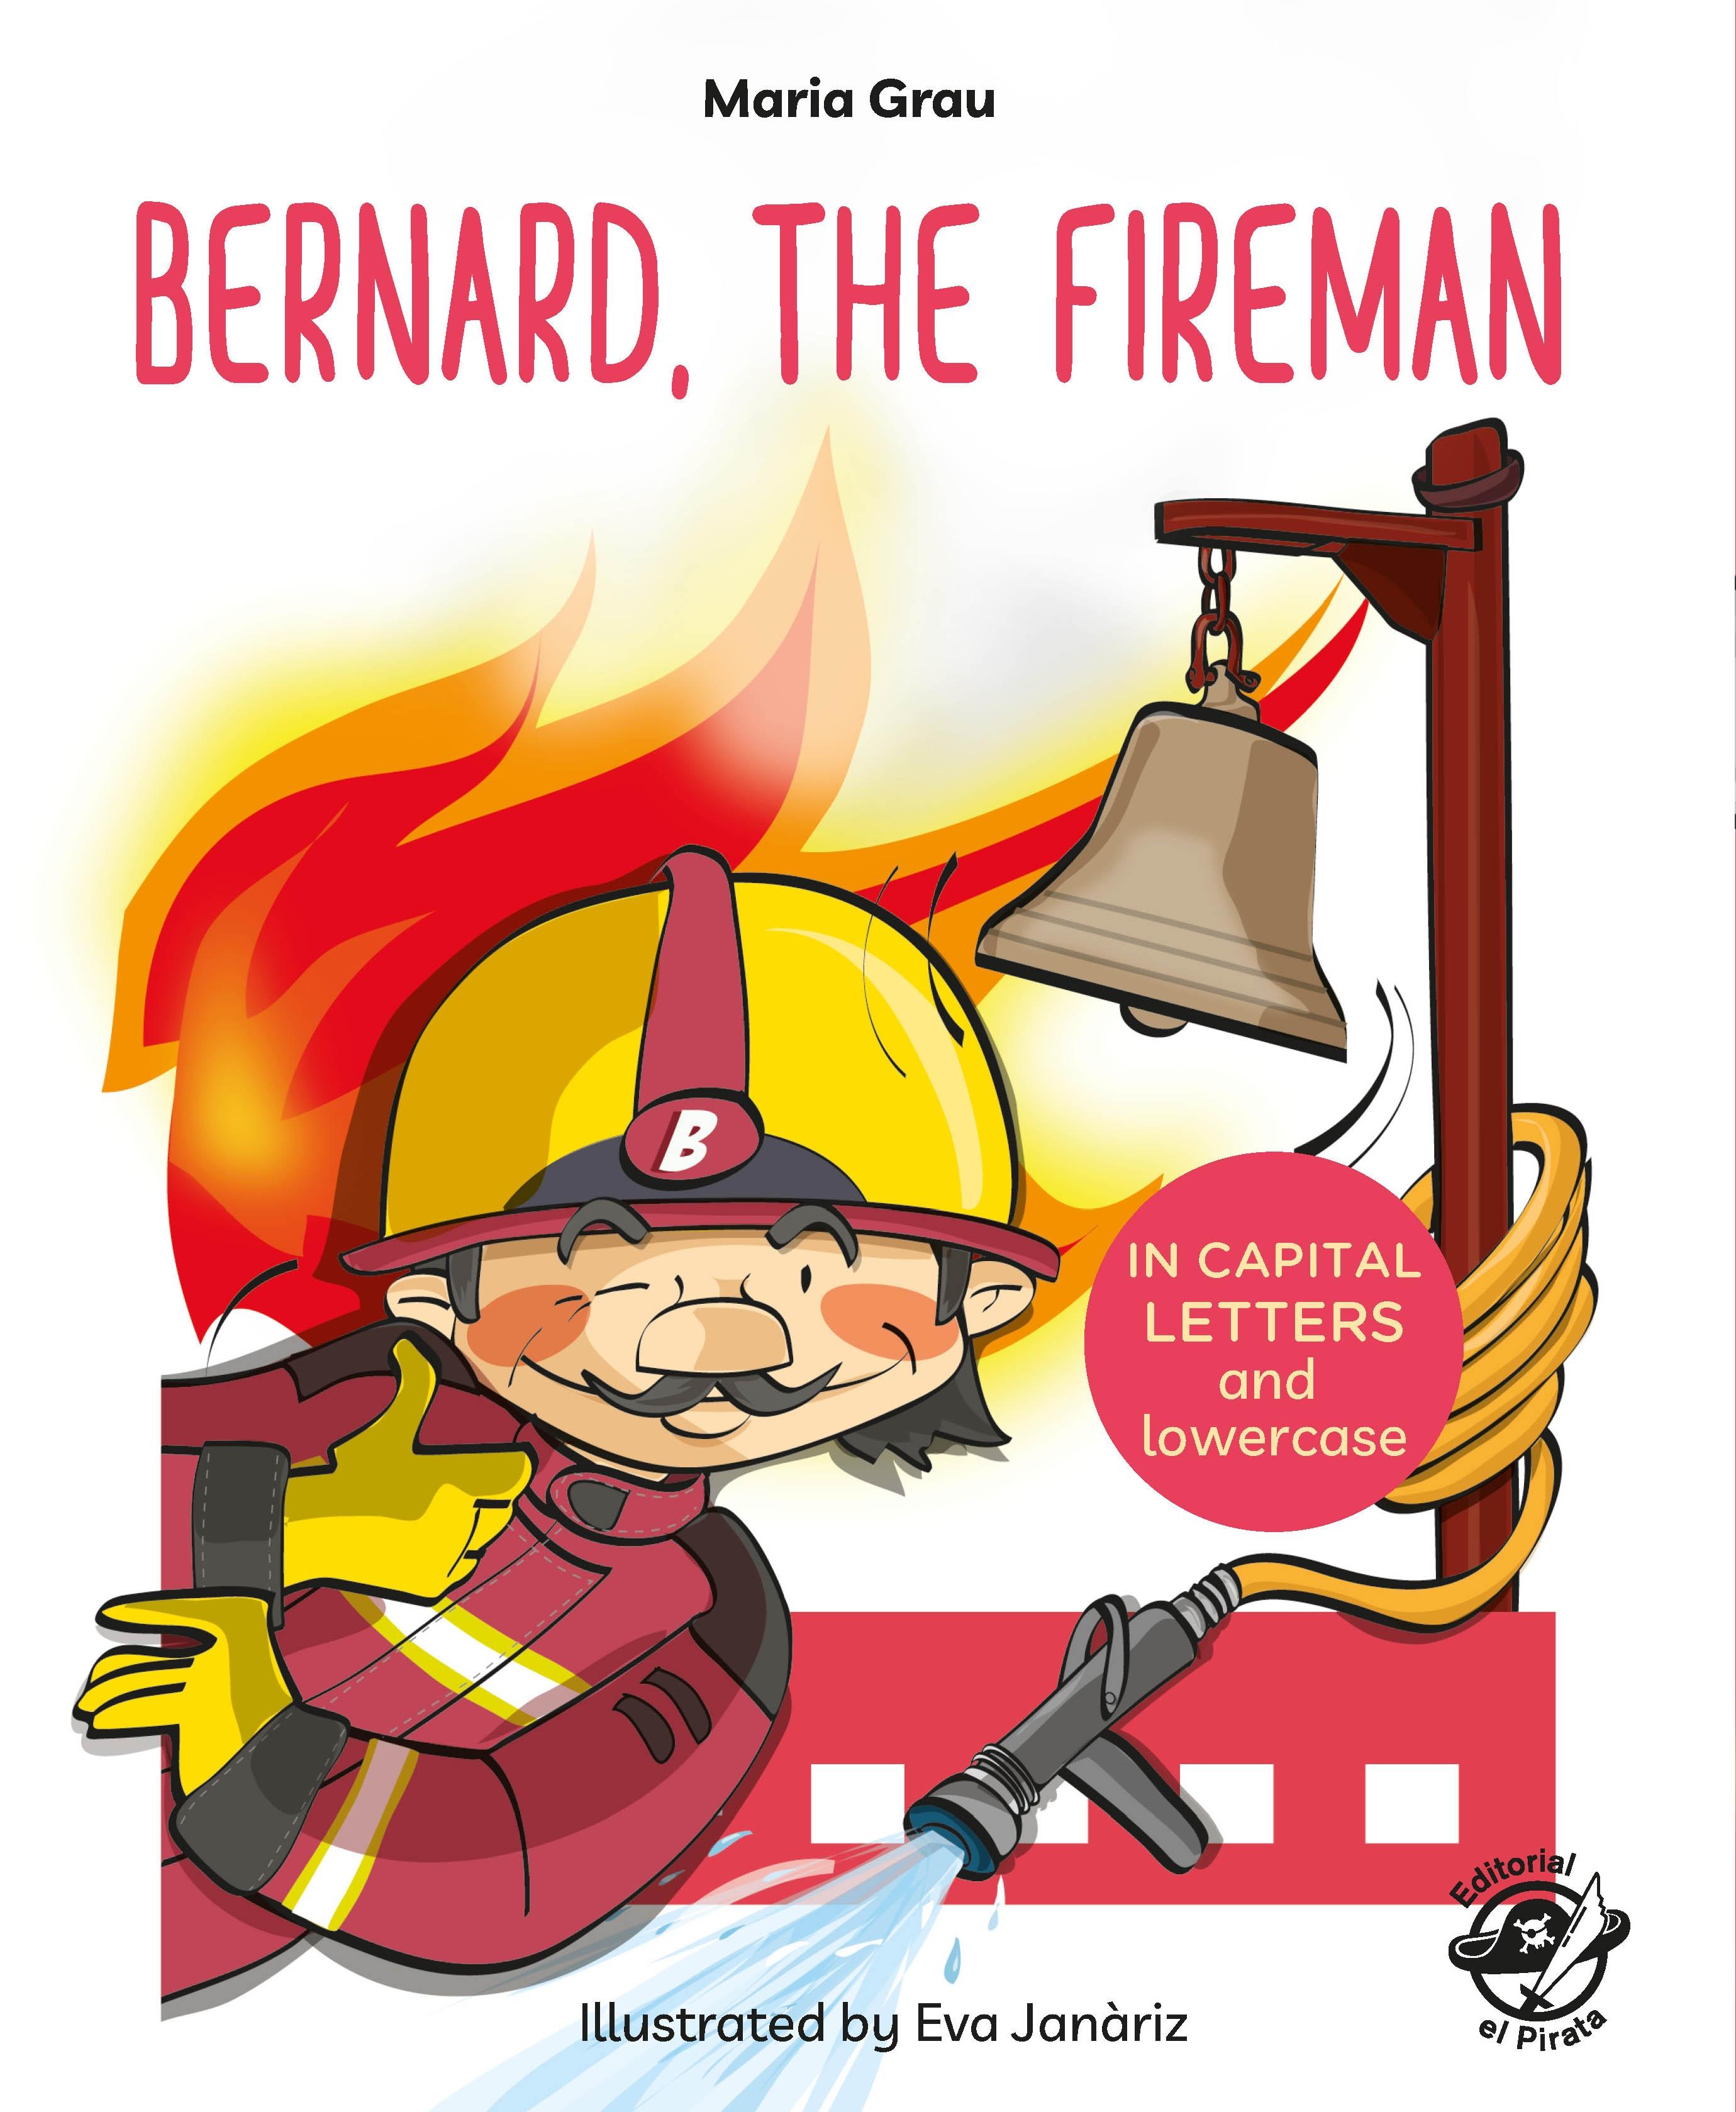 Bernard, the fireman "English Children's Books - Learn to Read in CAPITAL Letters and Lowercas"